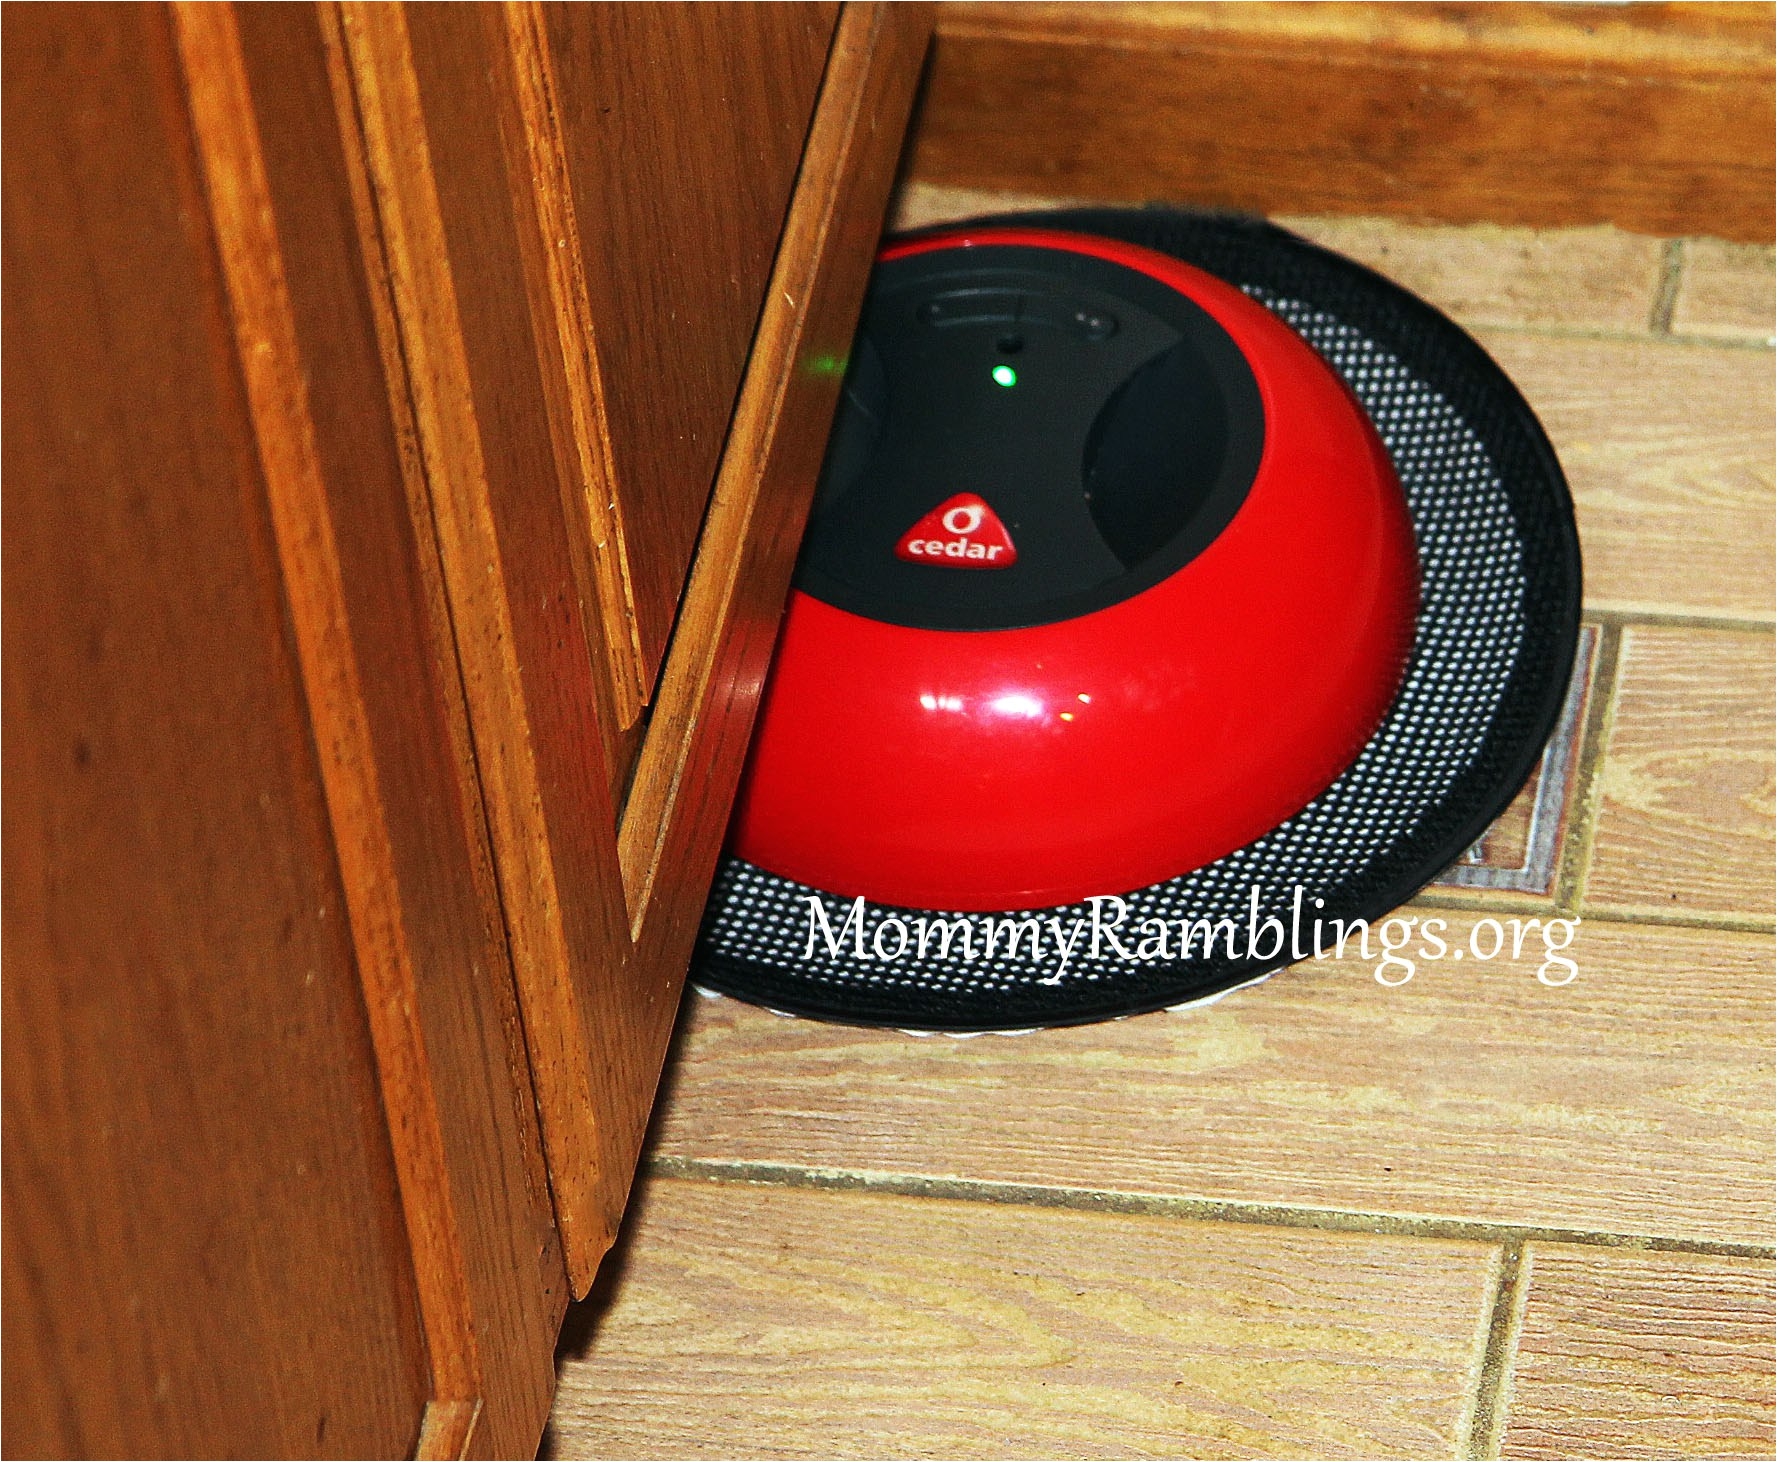 o cedar is sponsoring a giveaway on mommy ramblings one lucky blog reader will win a o cedar o duster robotic floor cleaner thank you o cedar for the